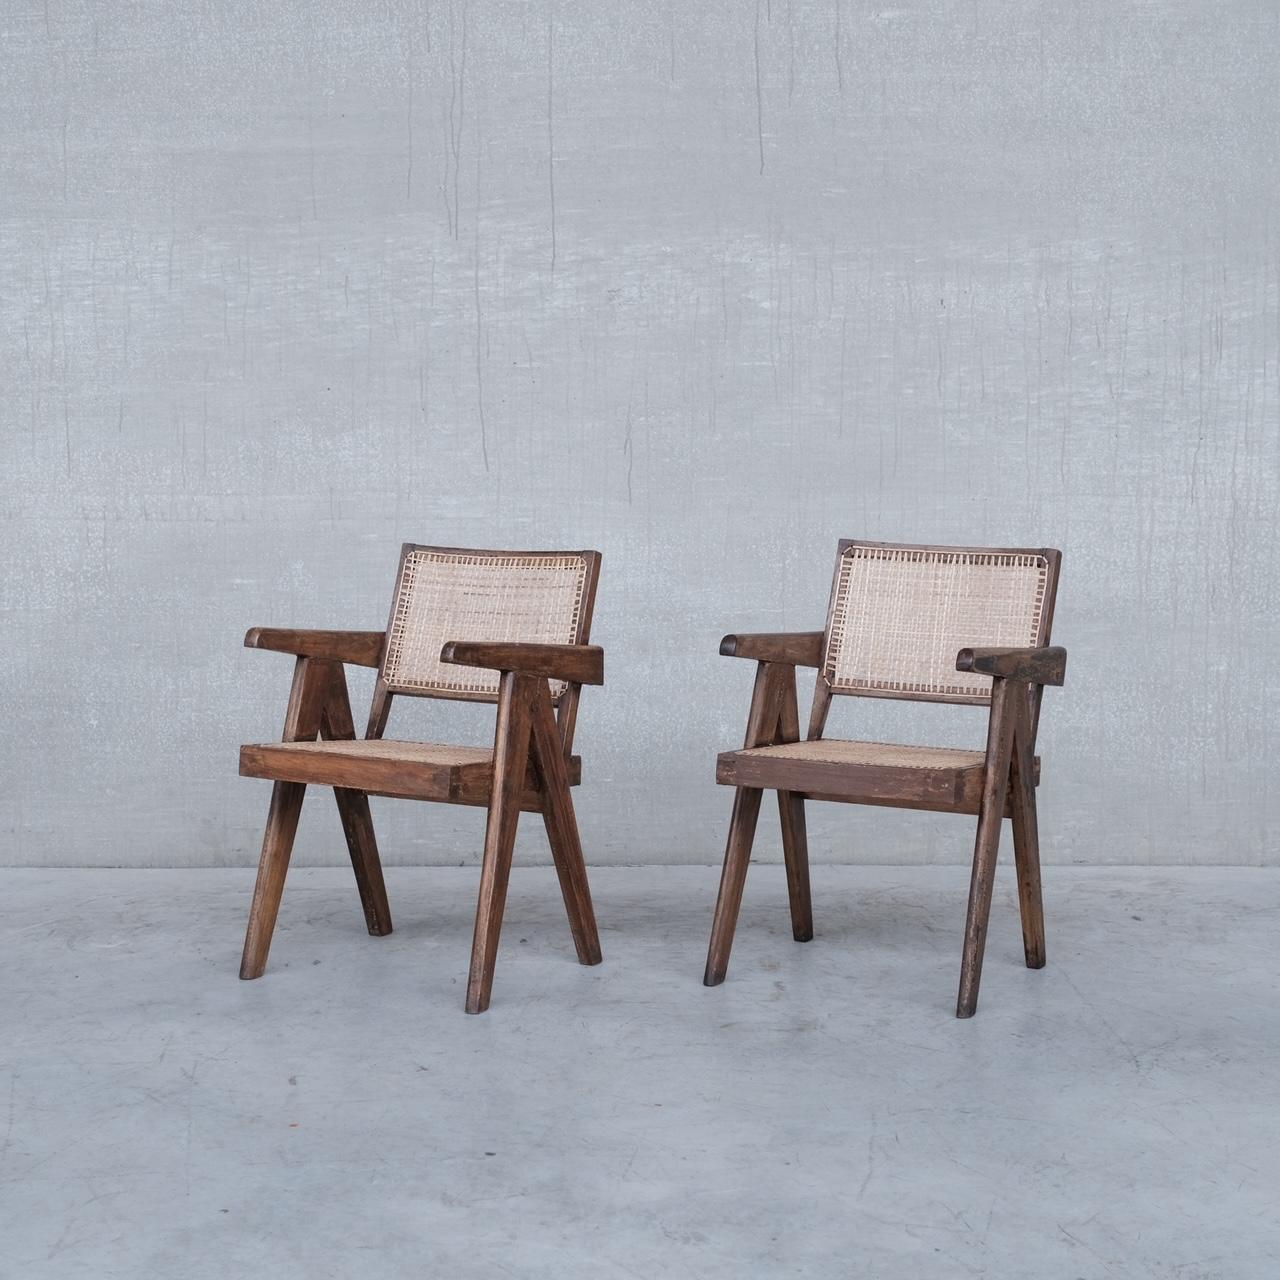 A pair of increasingly scarce original Pierre Jeanneret armchair desk chairs. 

A flexible chair that can be used at tables or as bedroom chairs or lounge chairs. 

India, Chandigarh, c1955s. 

Model PJ-SI-28-B. 

Teak and cane. The cane has